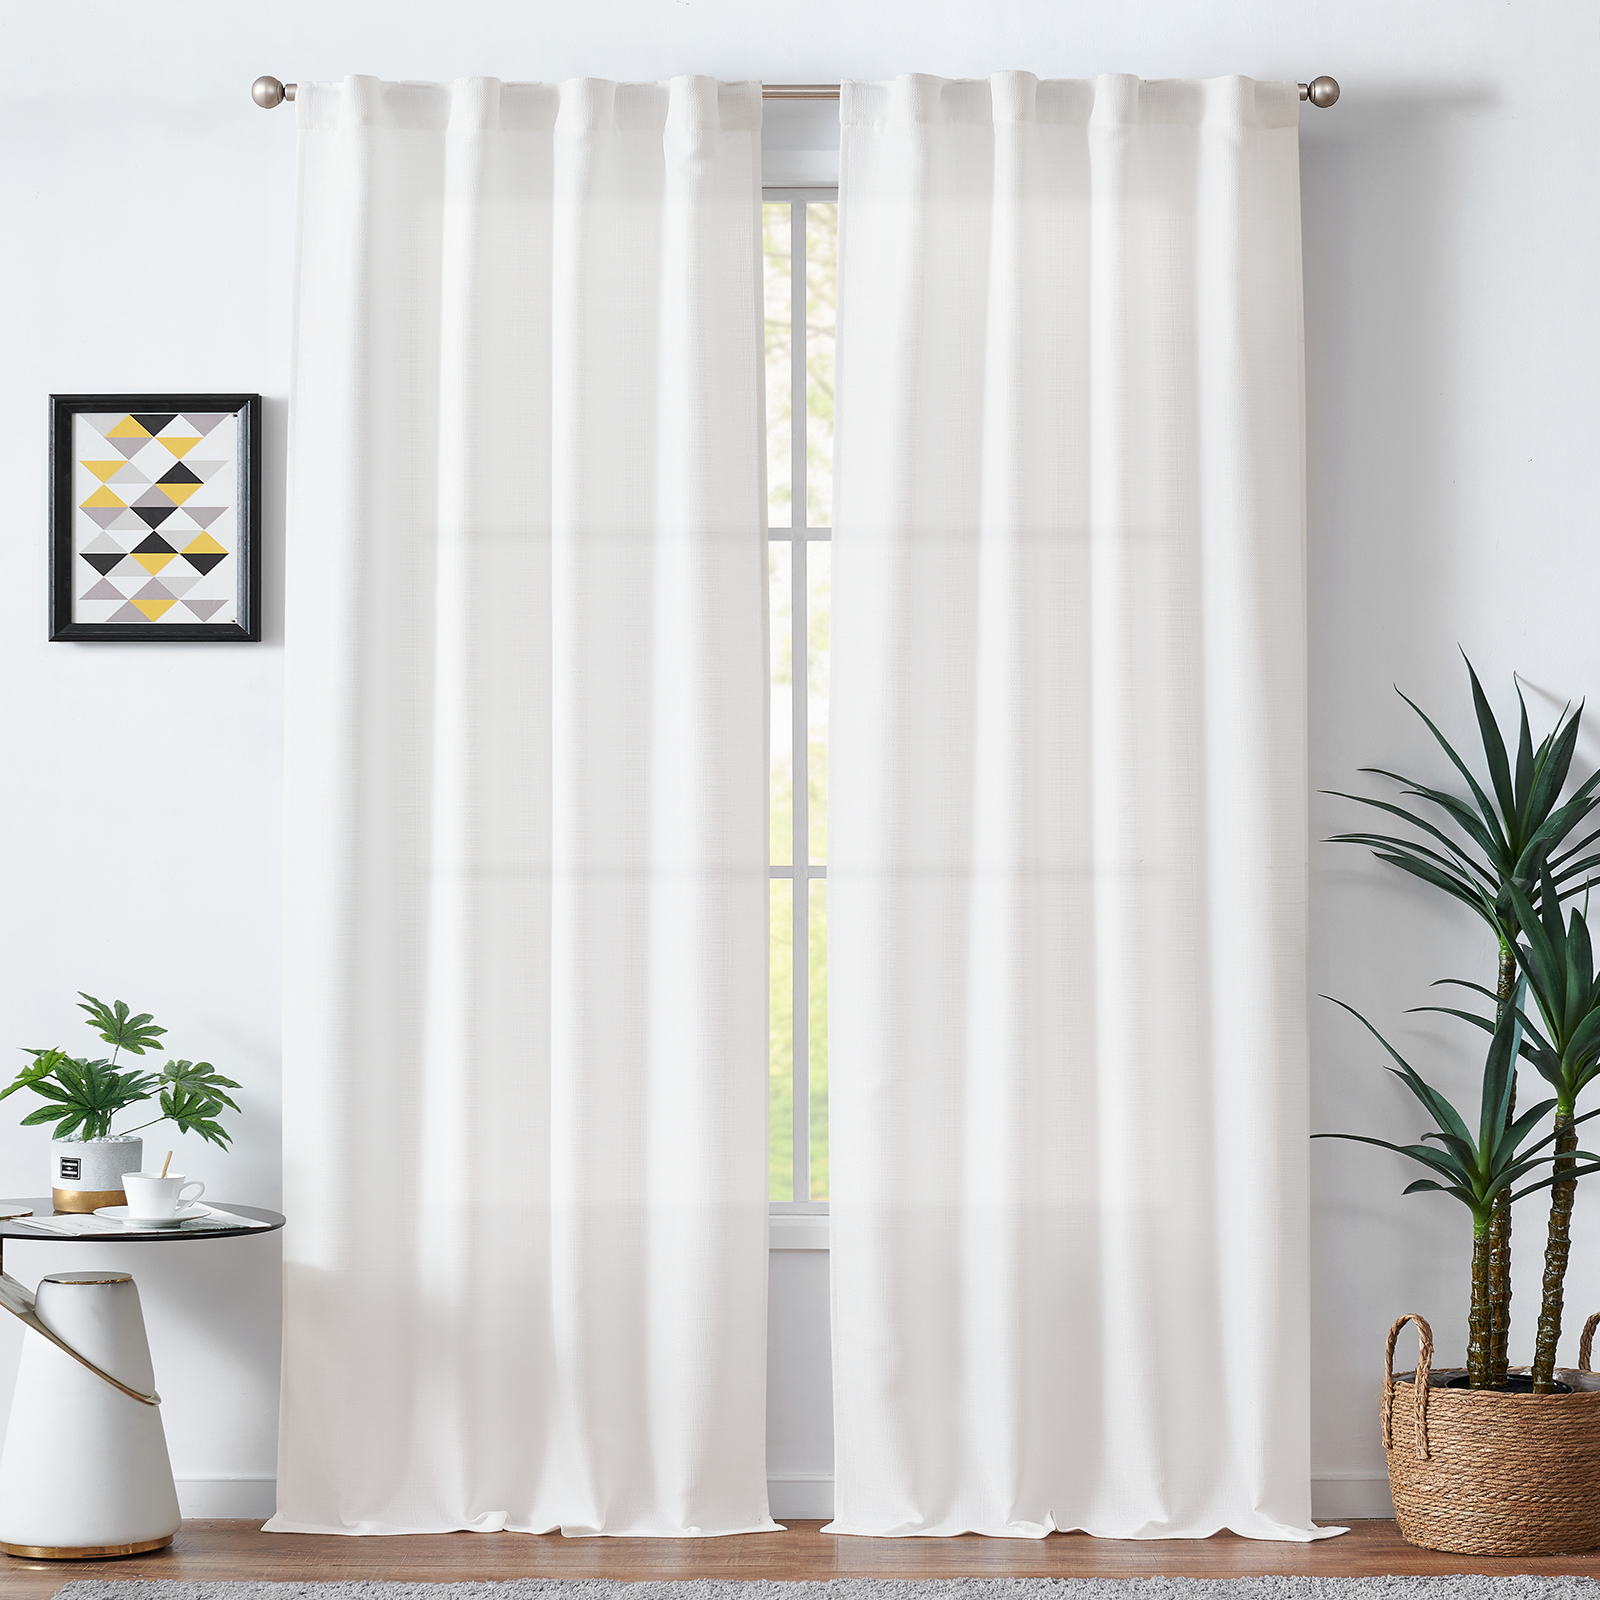 Curtainking White Curtains for Living Room 84 inches Linen Textured Curtains Light Filtering Back Tab Curtains Casual Weave Back Tab Drapes 2 Panels - image 2 of 8